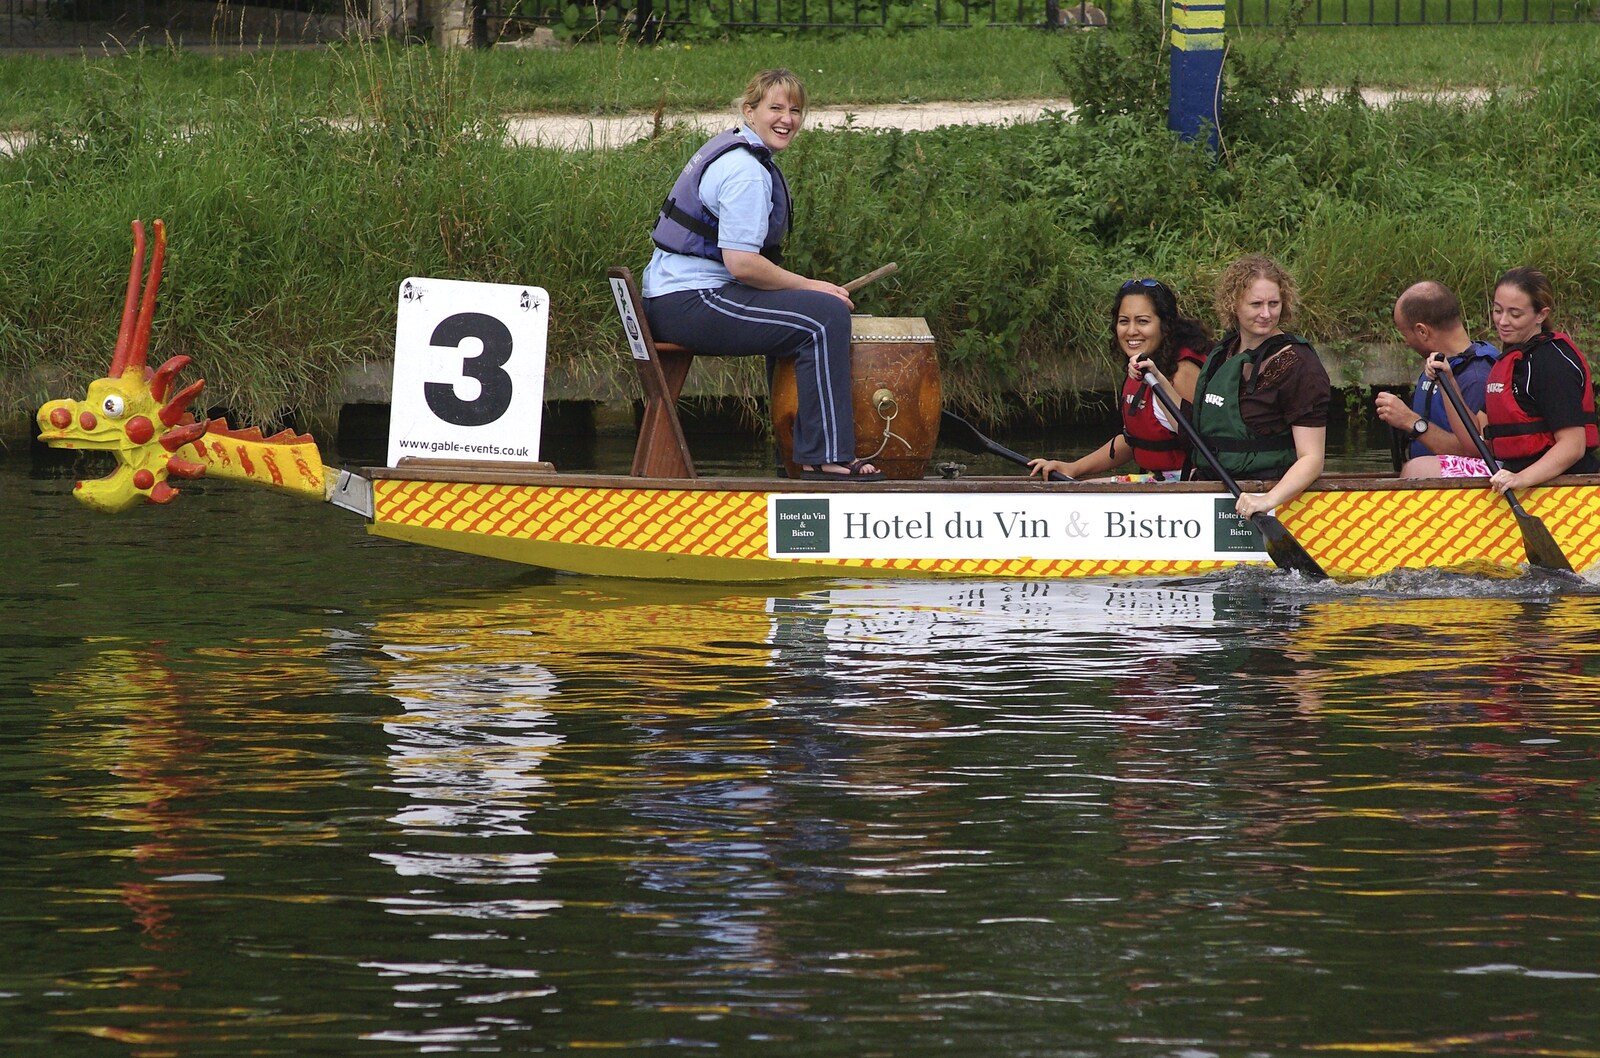 Qualcomm's Dragon-Boat Racing, Fen Ditton, Cambridge - 8th September 2007: Boat number 3 drifts past